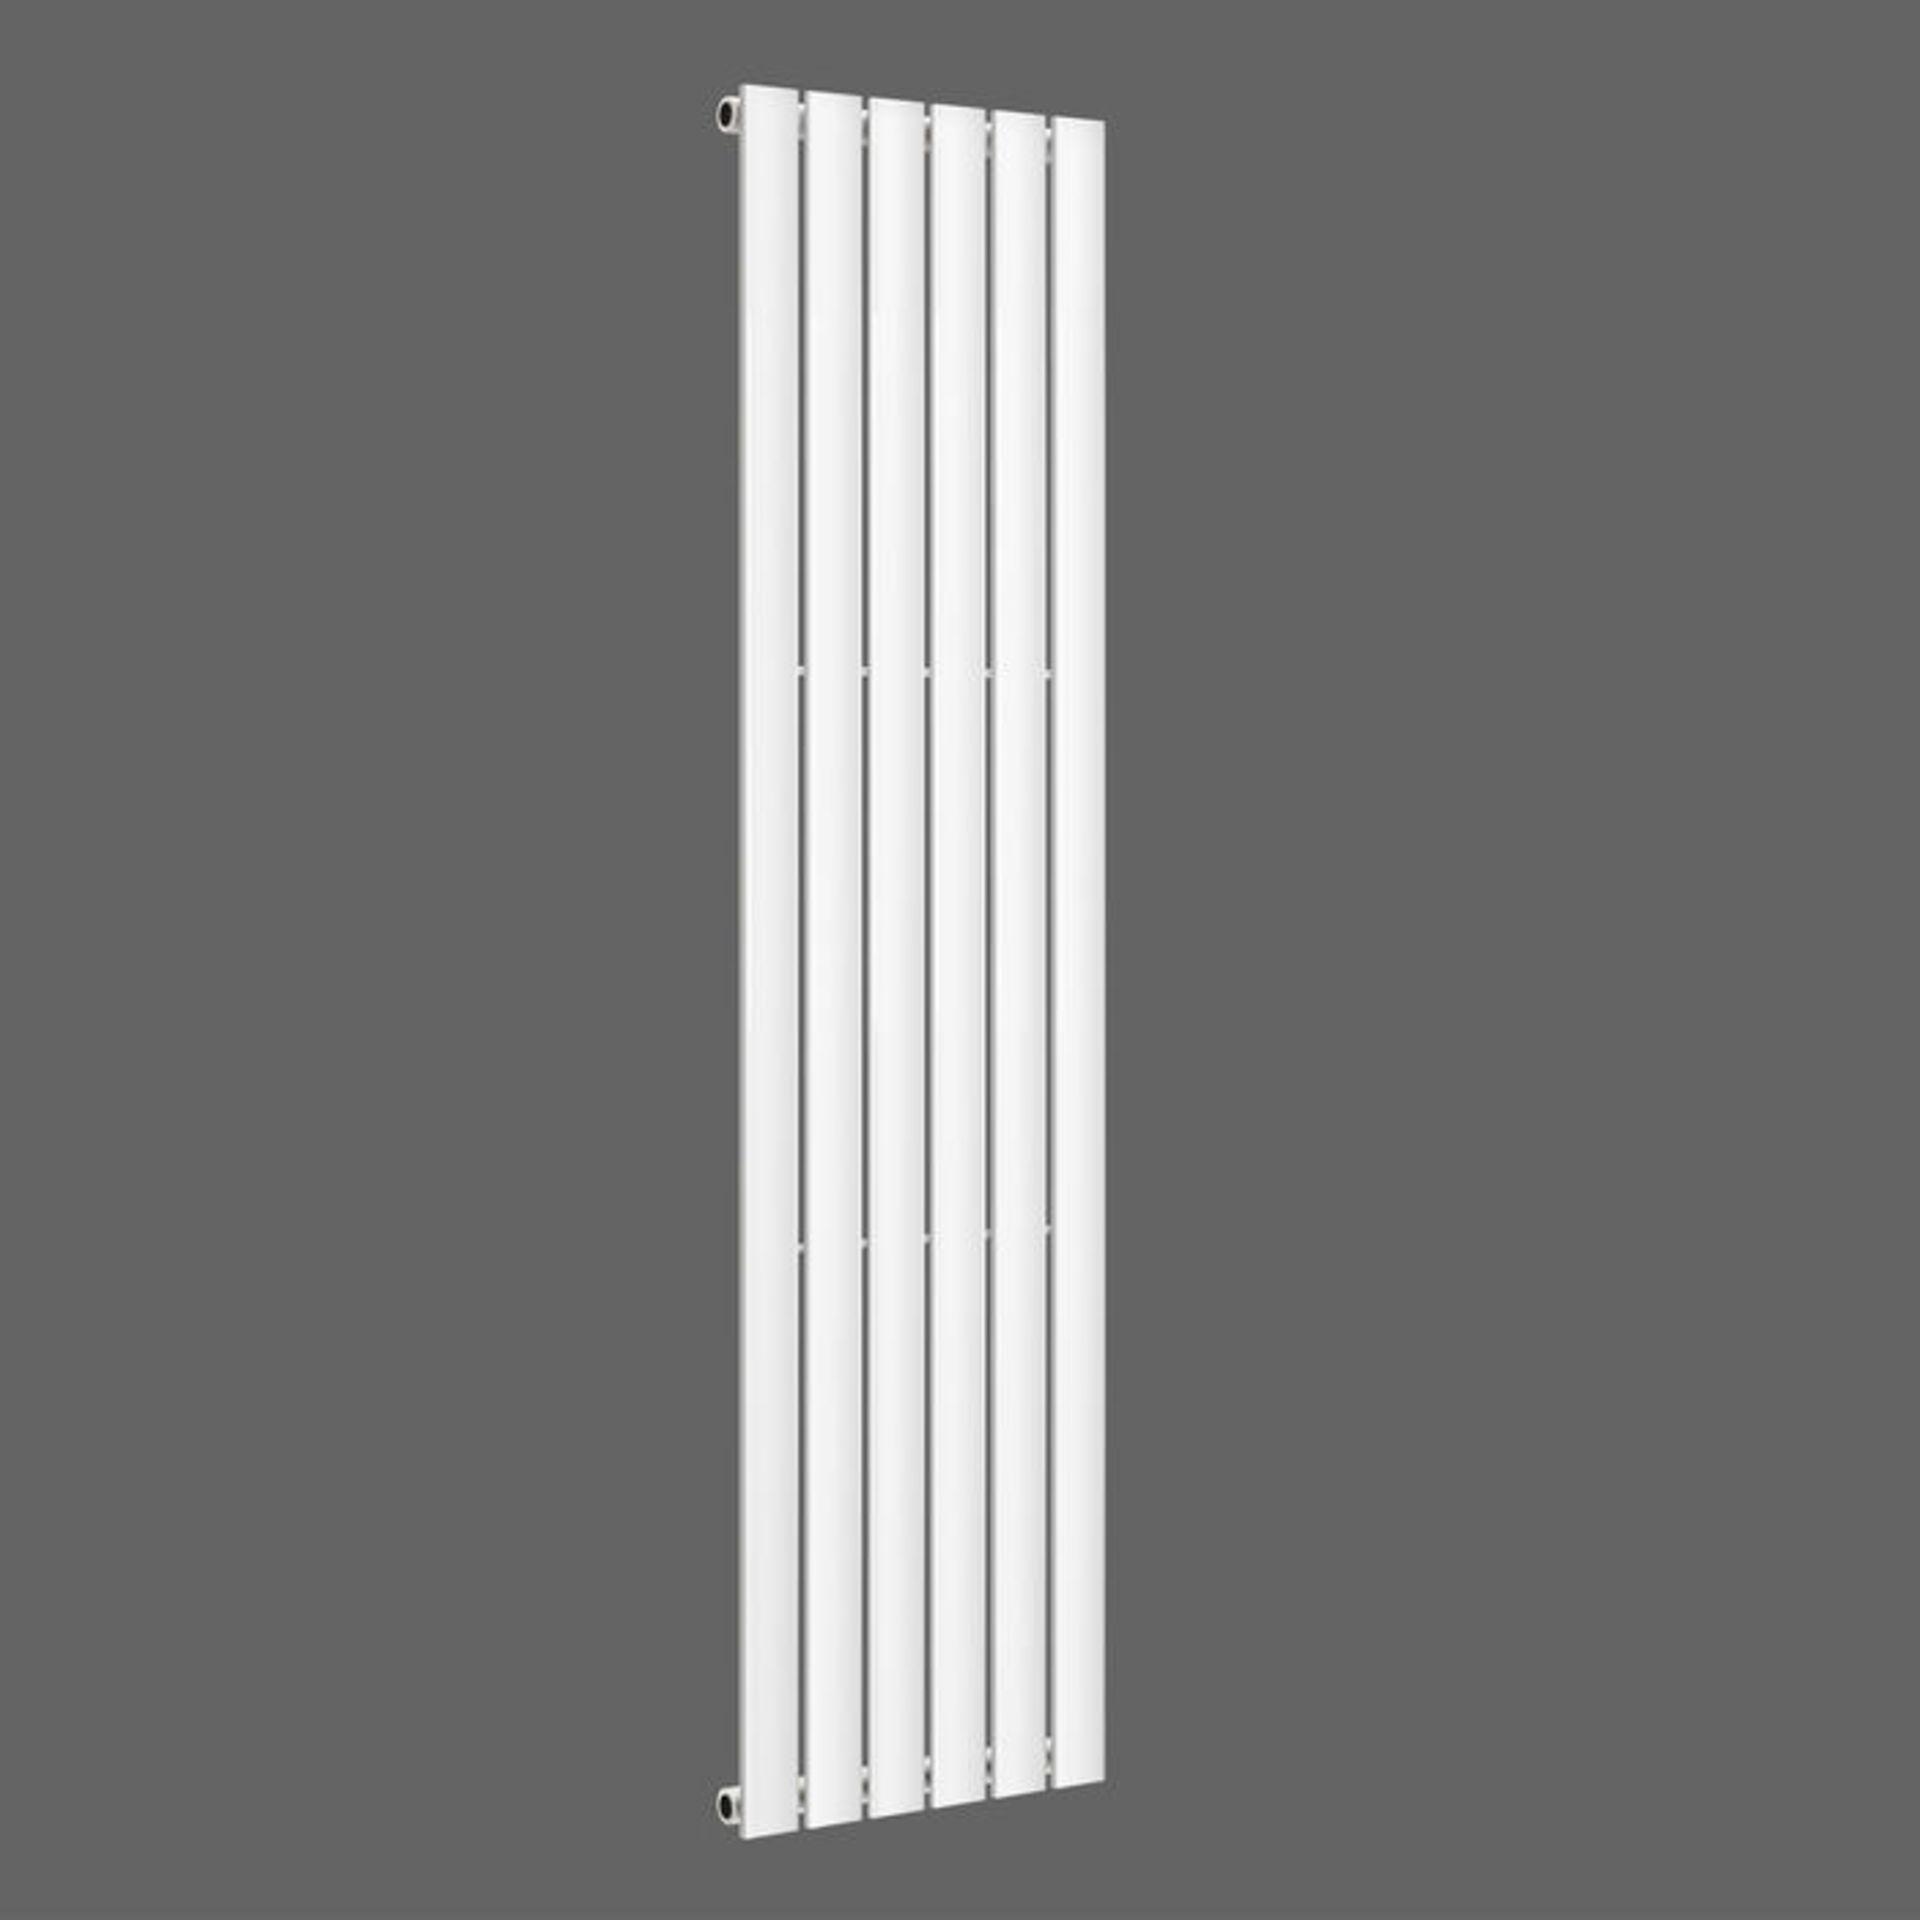 (S53) 1800x452mm Gloss White Single Flat Panel Vertical Radiator RRP £255.98 Made with low carbon - Bild 2 aus 2